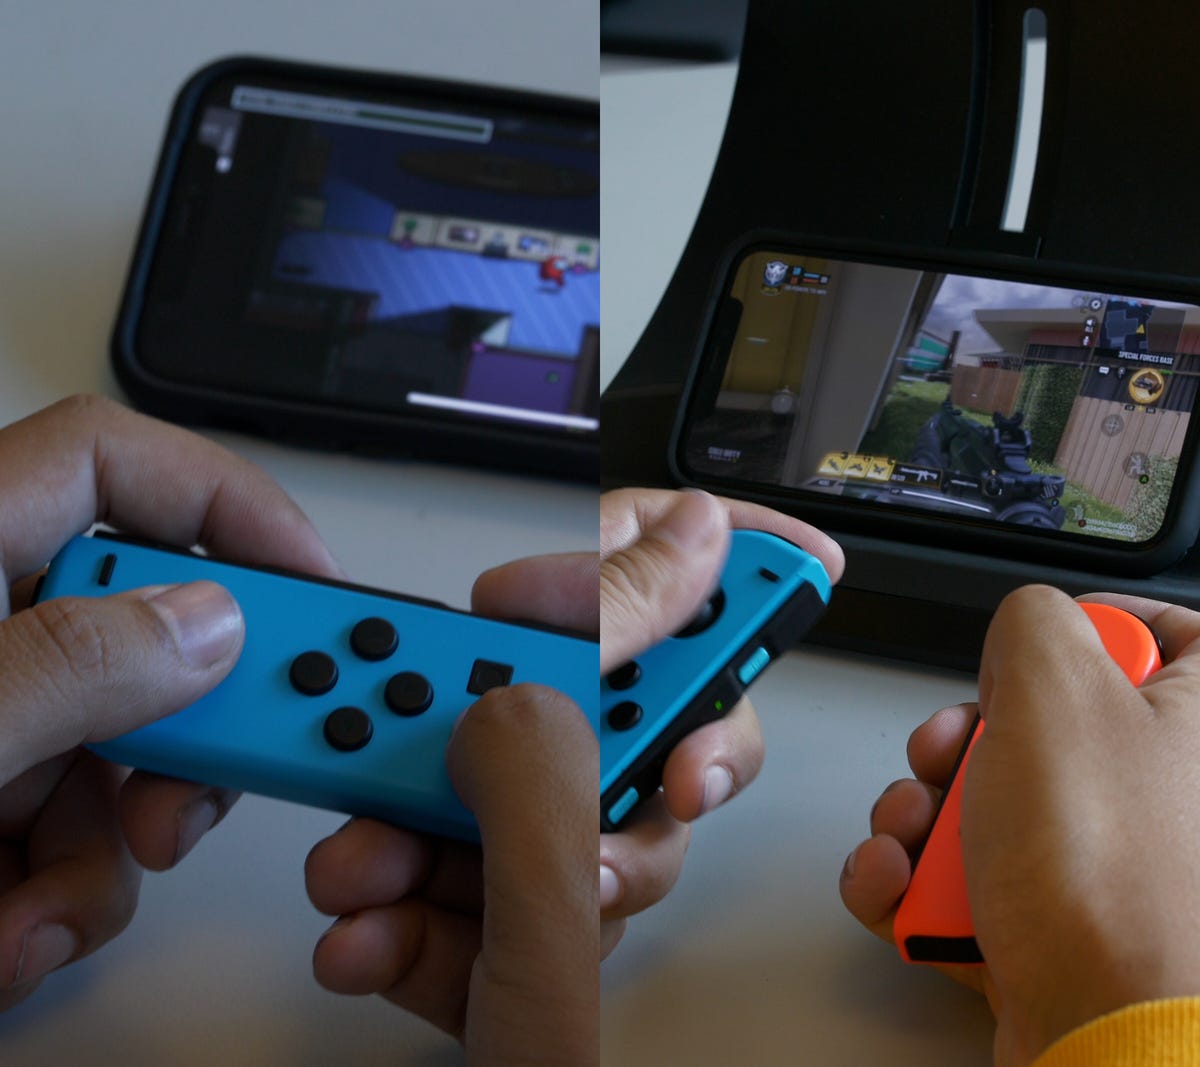 Joy-Con controllers used to play games on iPhone